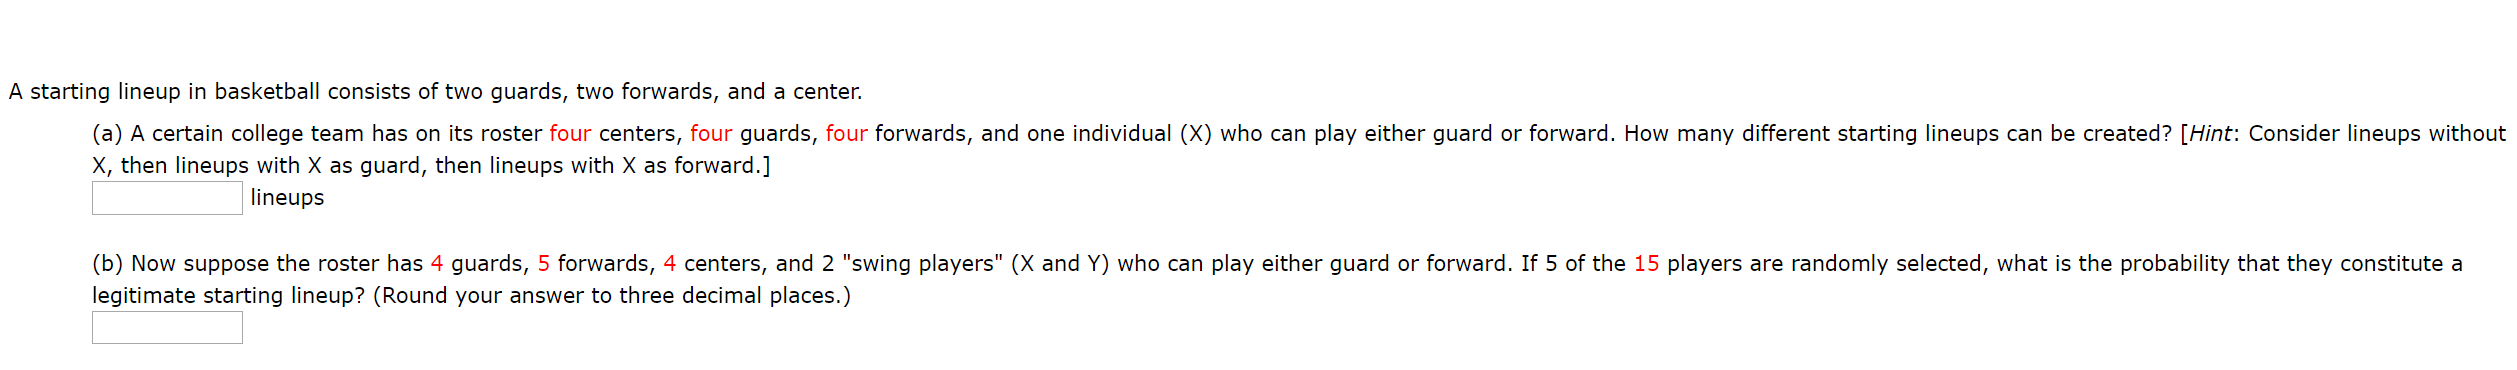 A starting lineup in basketball consists of two guards, two forwards, and a center.
(a) A certain college team has on its roster four centers, four guards, four forwards, and one individual (X) who can play either guard or forward. How many different starting lineups can be created? [Hint: Consider lineups without
X, then lineups with X as guard, then lineups with X as forward.]
lineups
(b) Now suppose the roster has 4 guards, 5 forwards, 4 centers, and 2 "swing players" (X and Y) who can play either guard or forward. If 5 of the 15 players are randomly selected, what is the probability that they constitute a
legitimate starting lineup? (Round your answer to three decimal places.)
